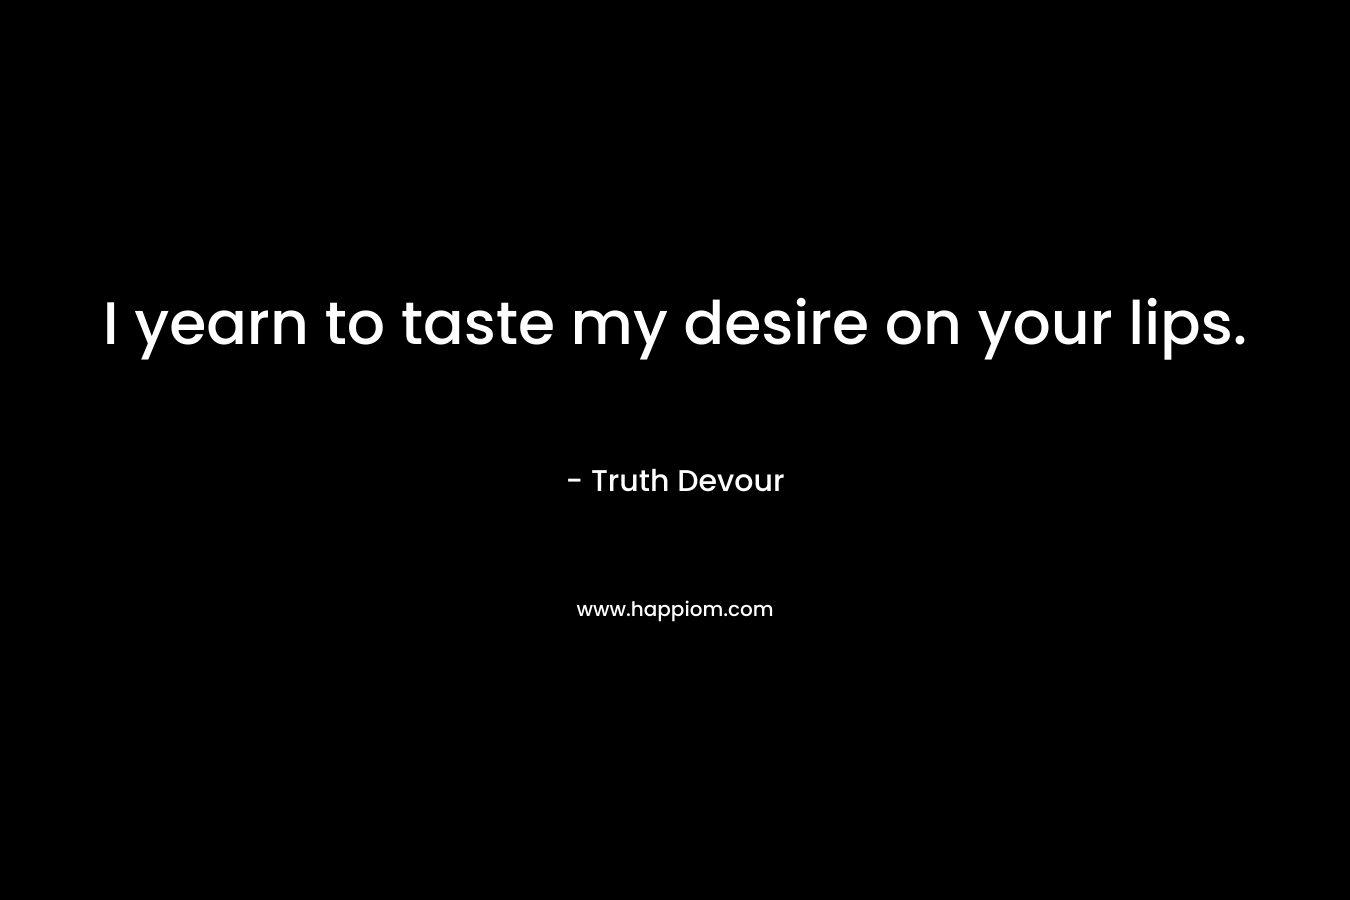 I yearn to taste my desire on your lips.